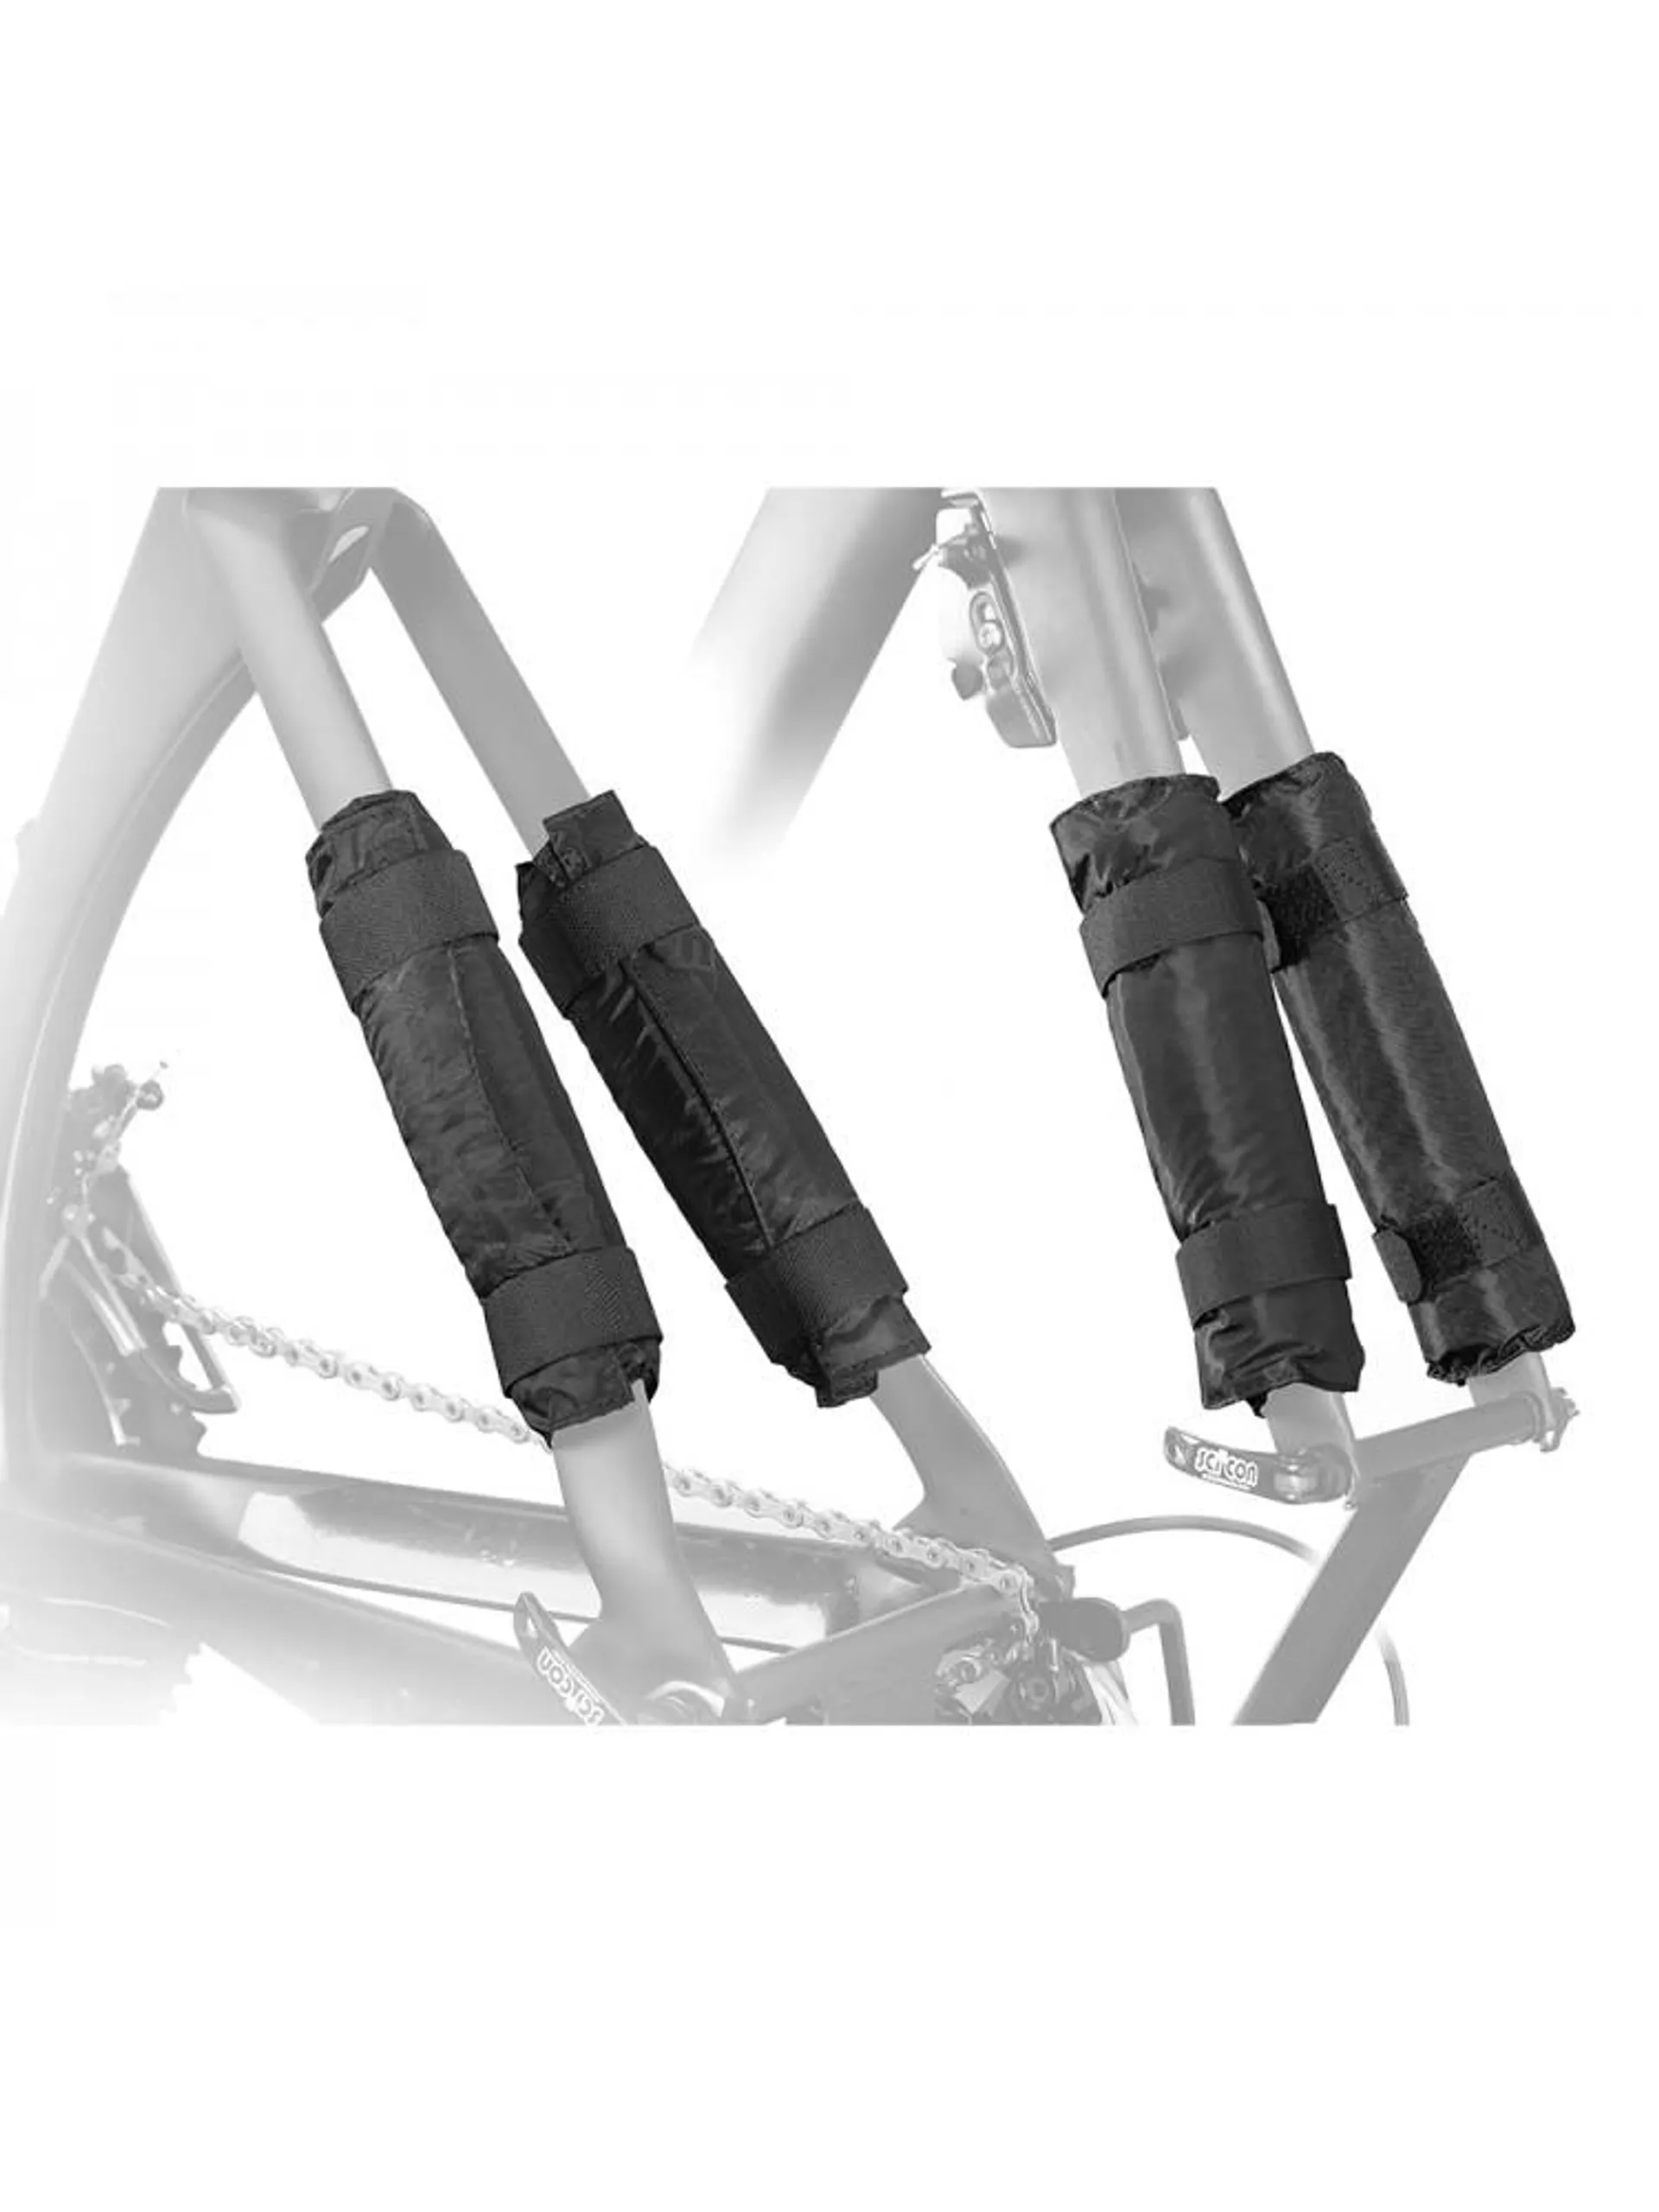 Front Fork and Seat Stay Pad Kit